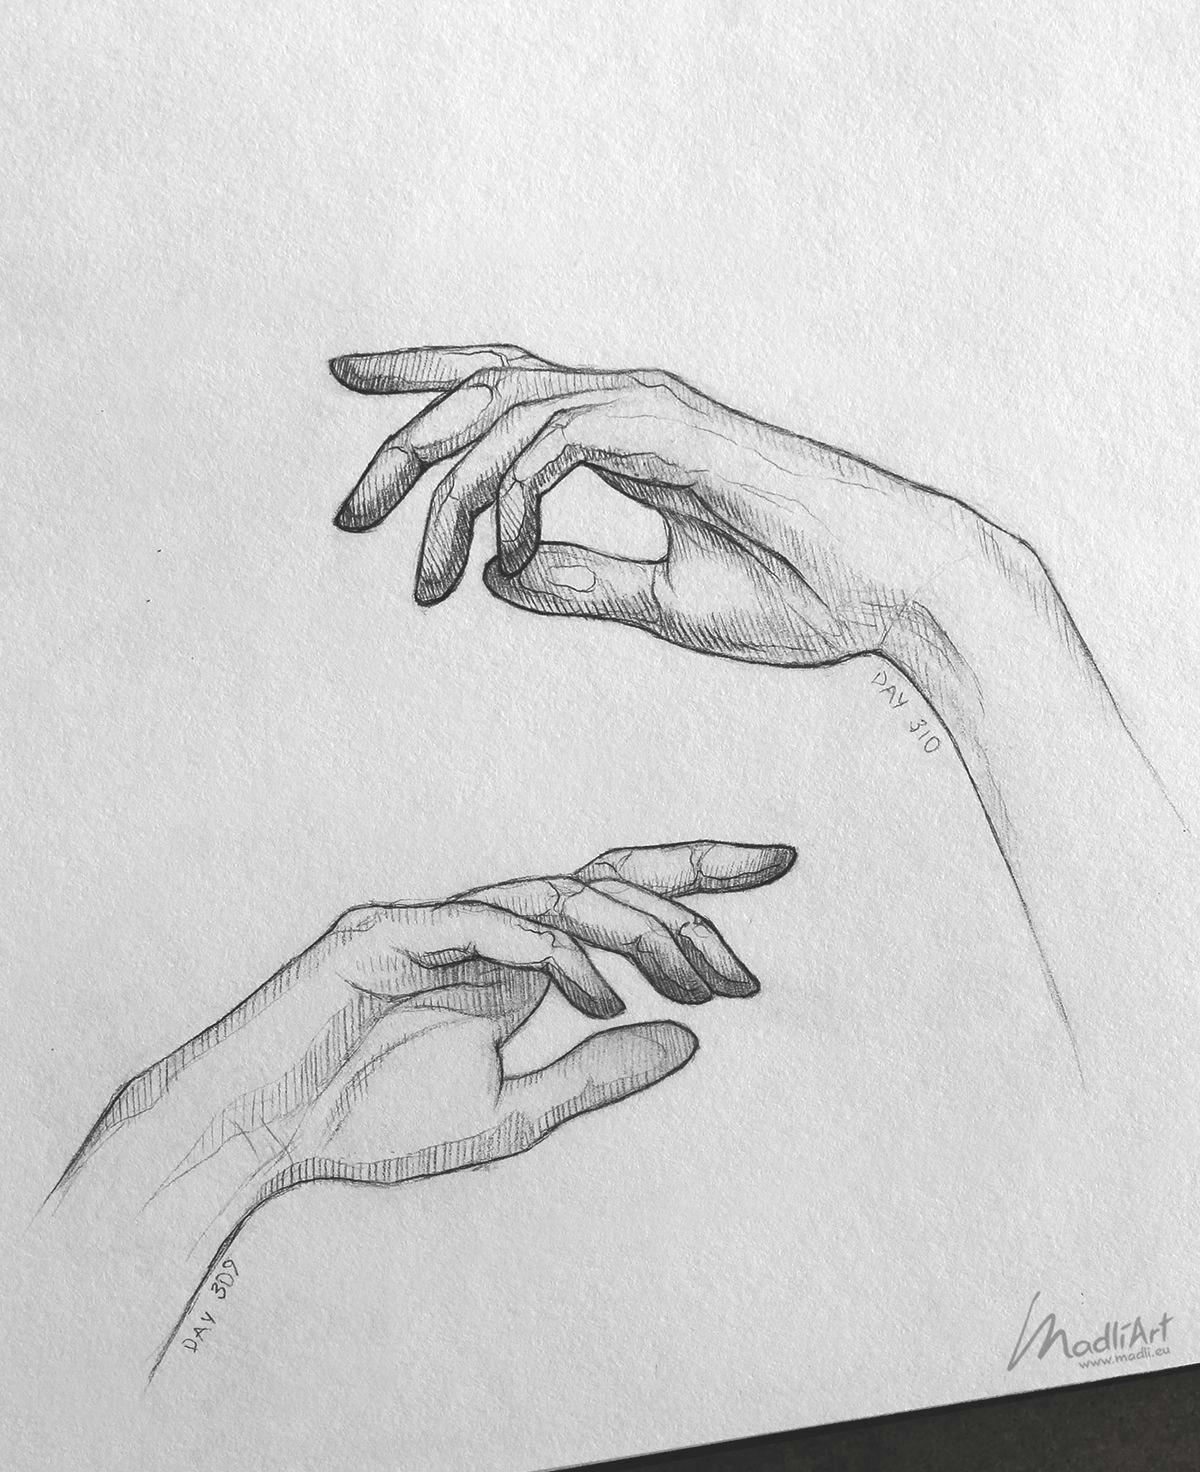 Halloween Picture Ideas to Draw Sketchbook Drawing Of Hands Close Up I Pencil Art Idea I